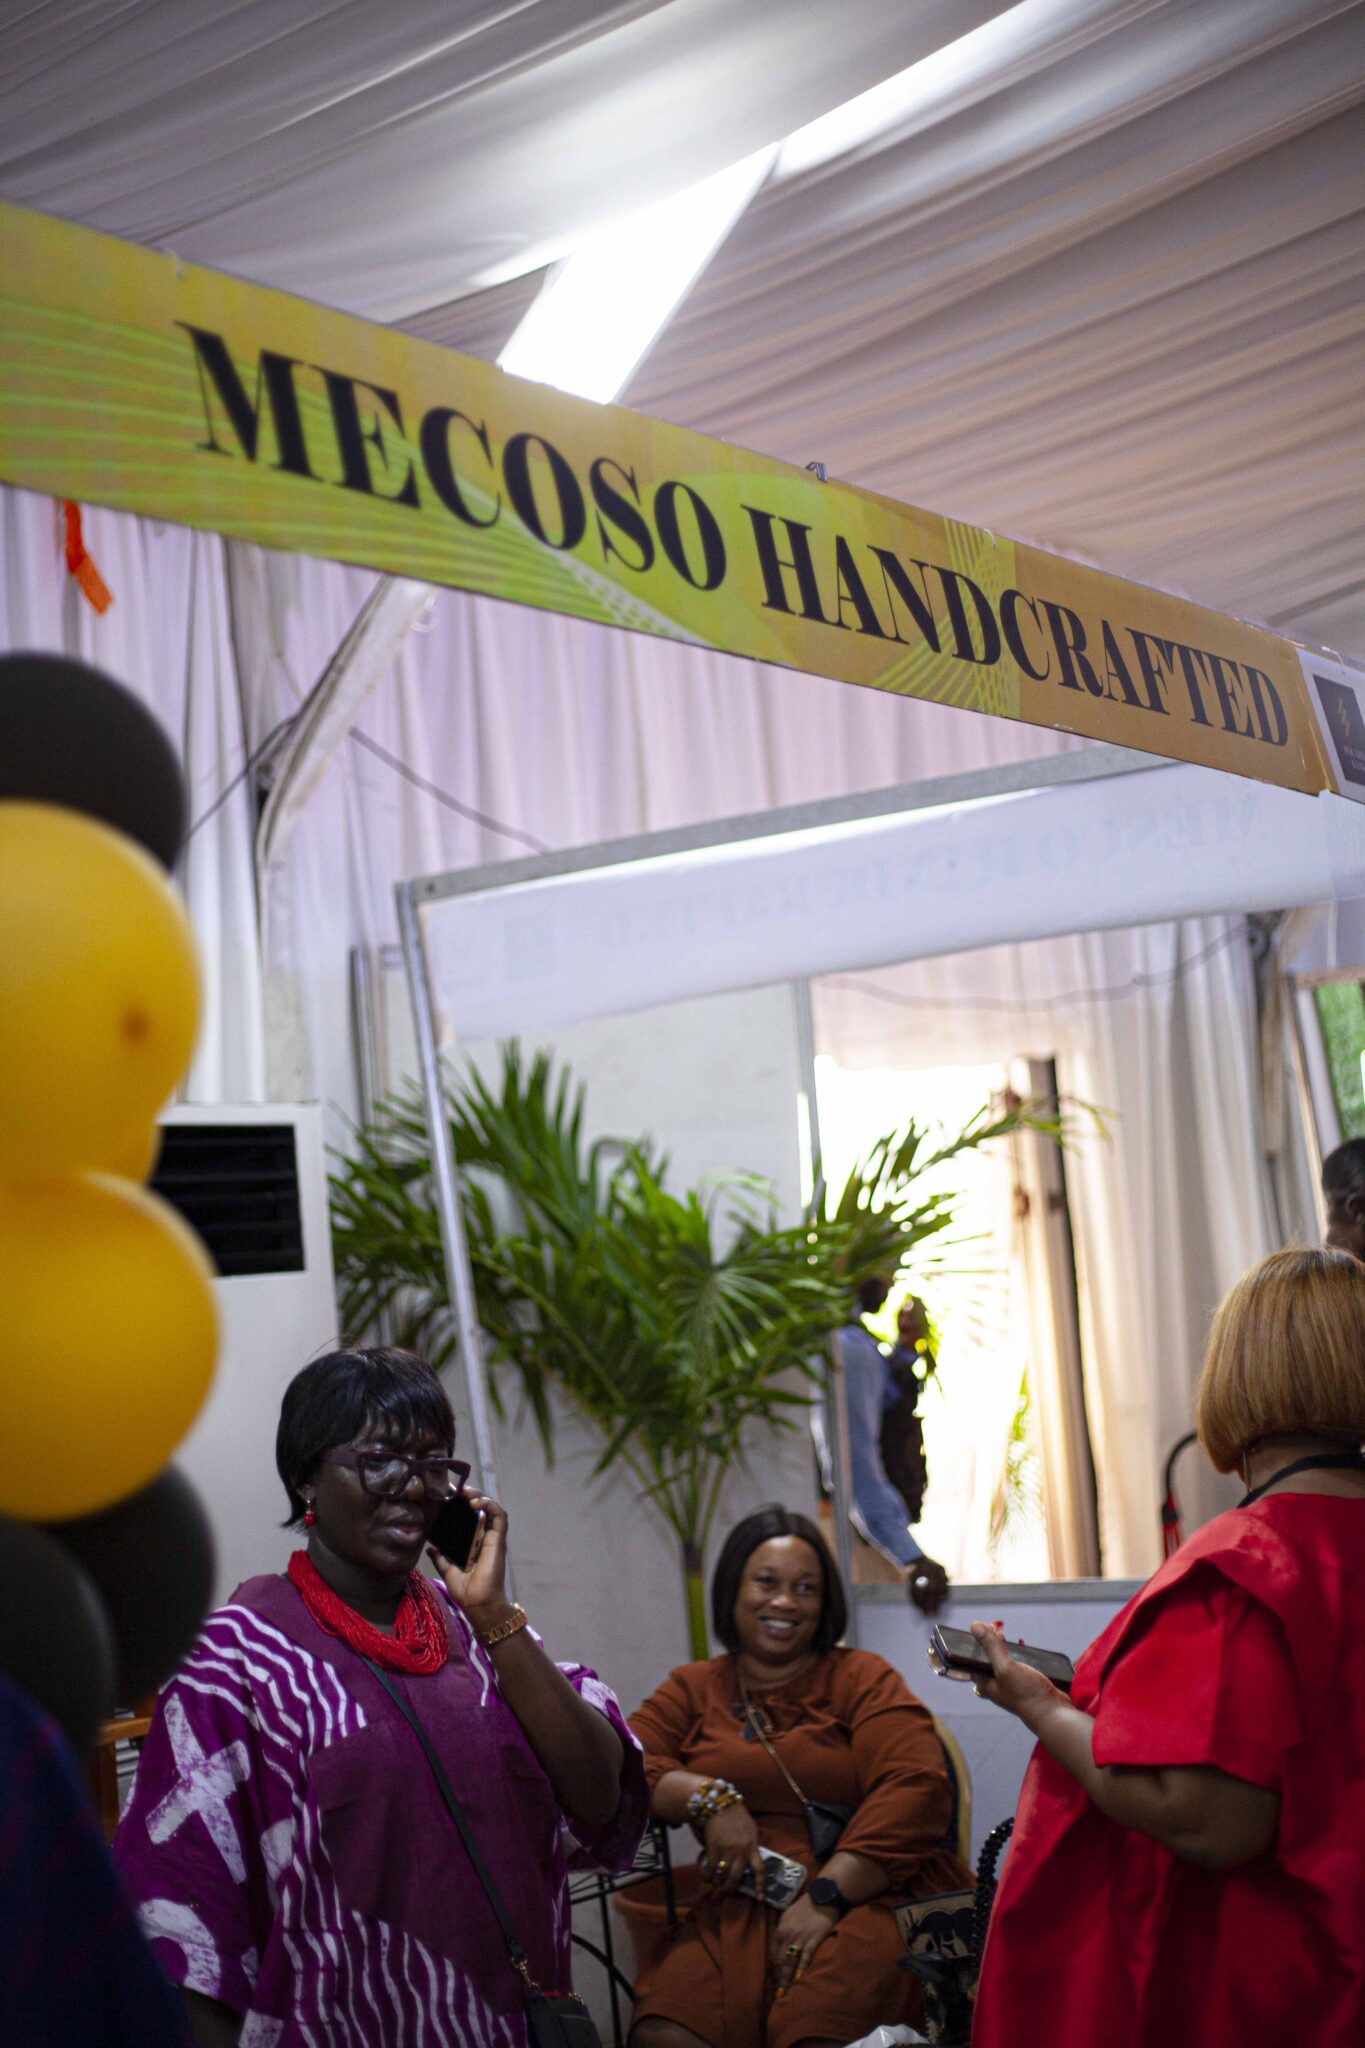 Mecoso Handcrafted The Fashion Souk
